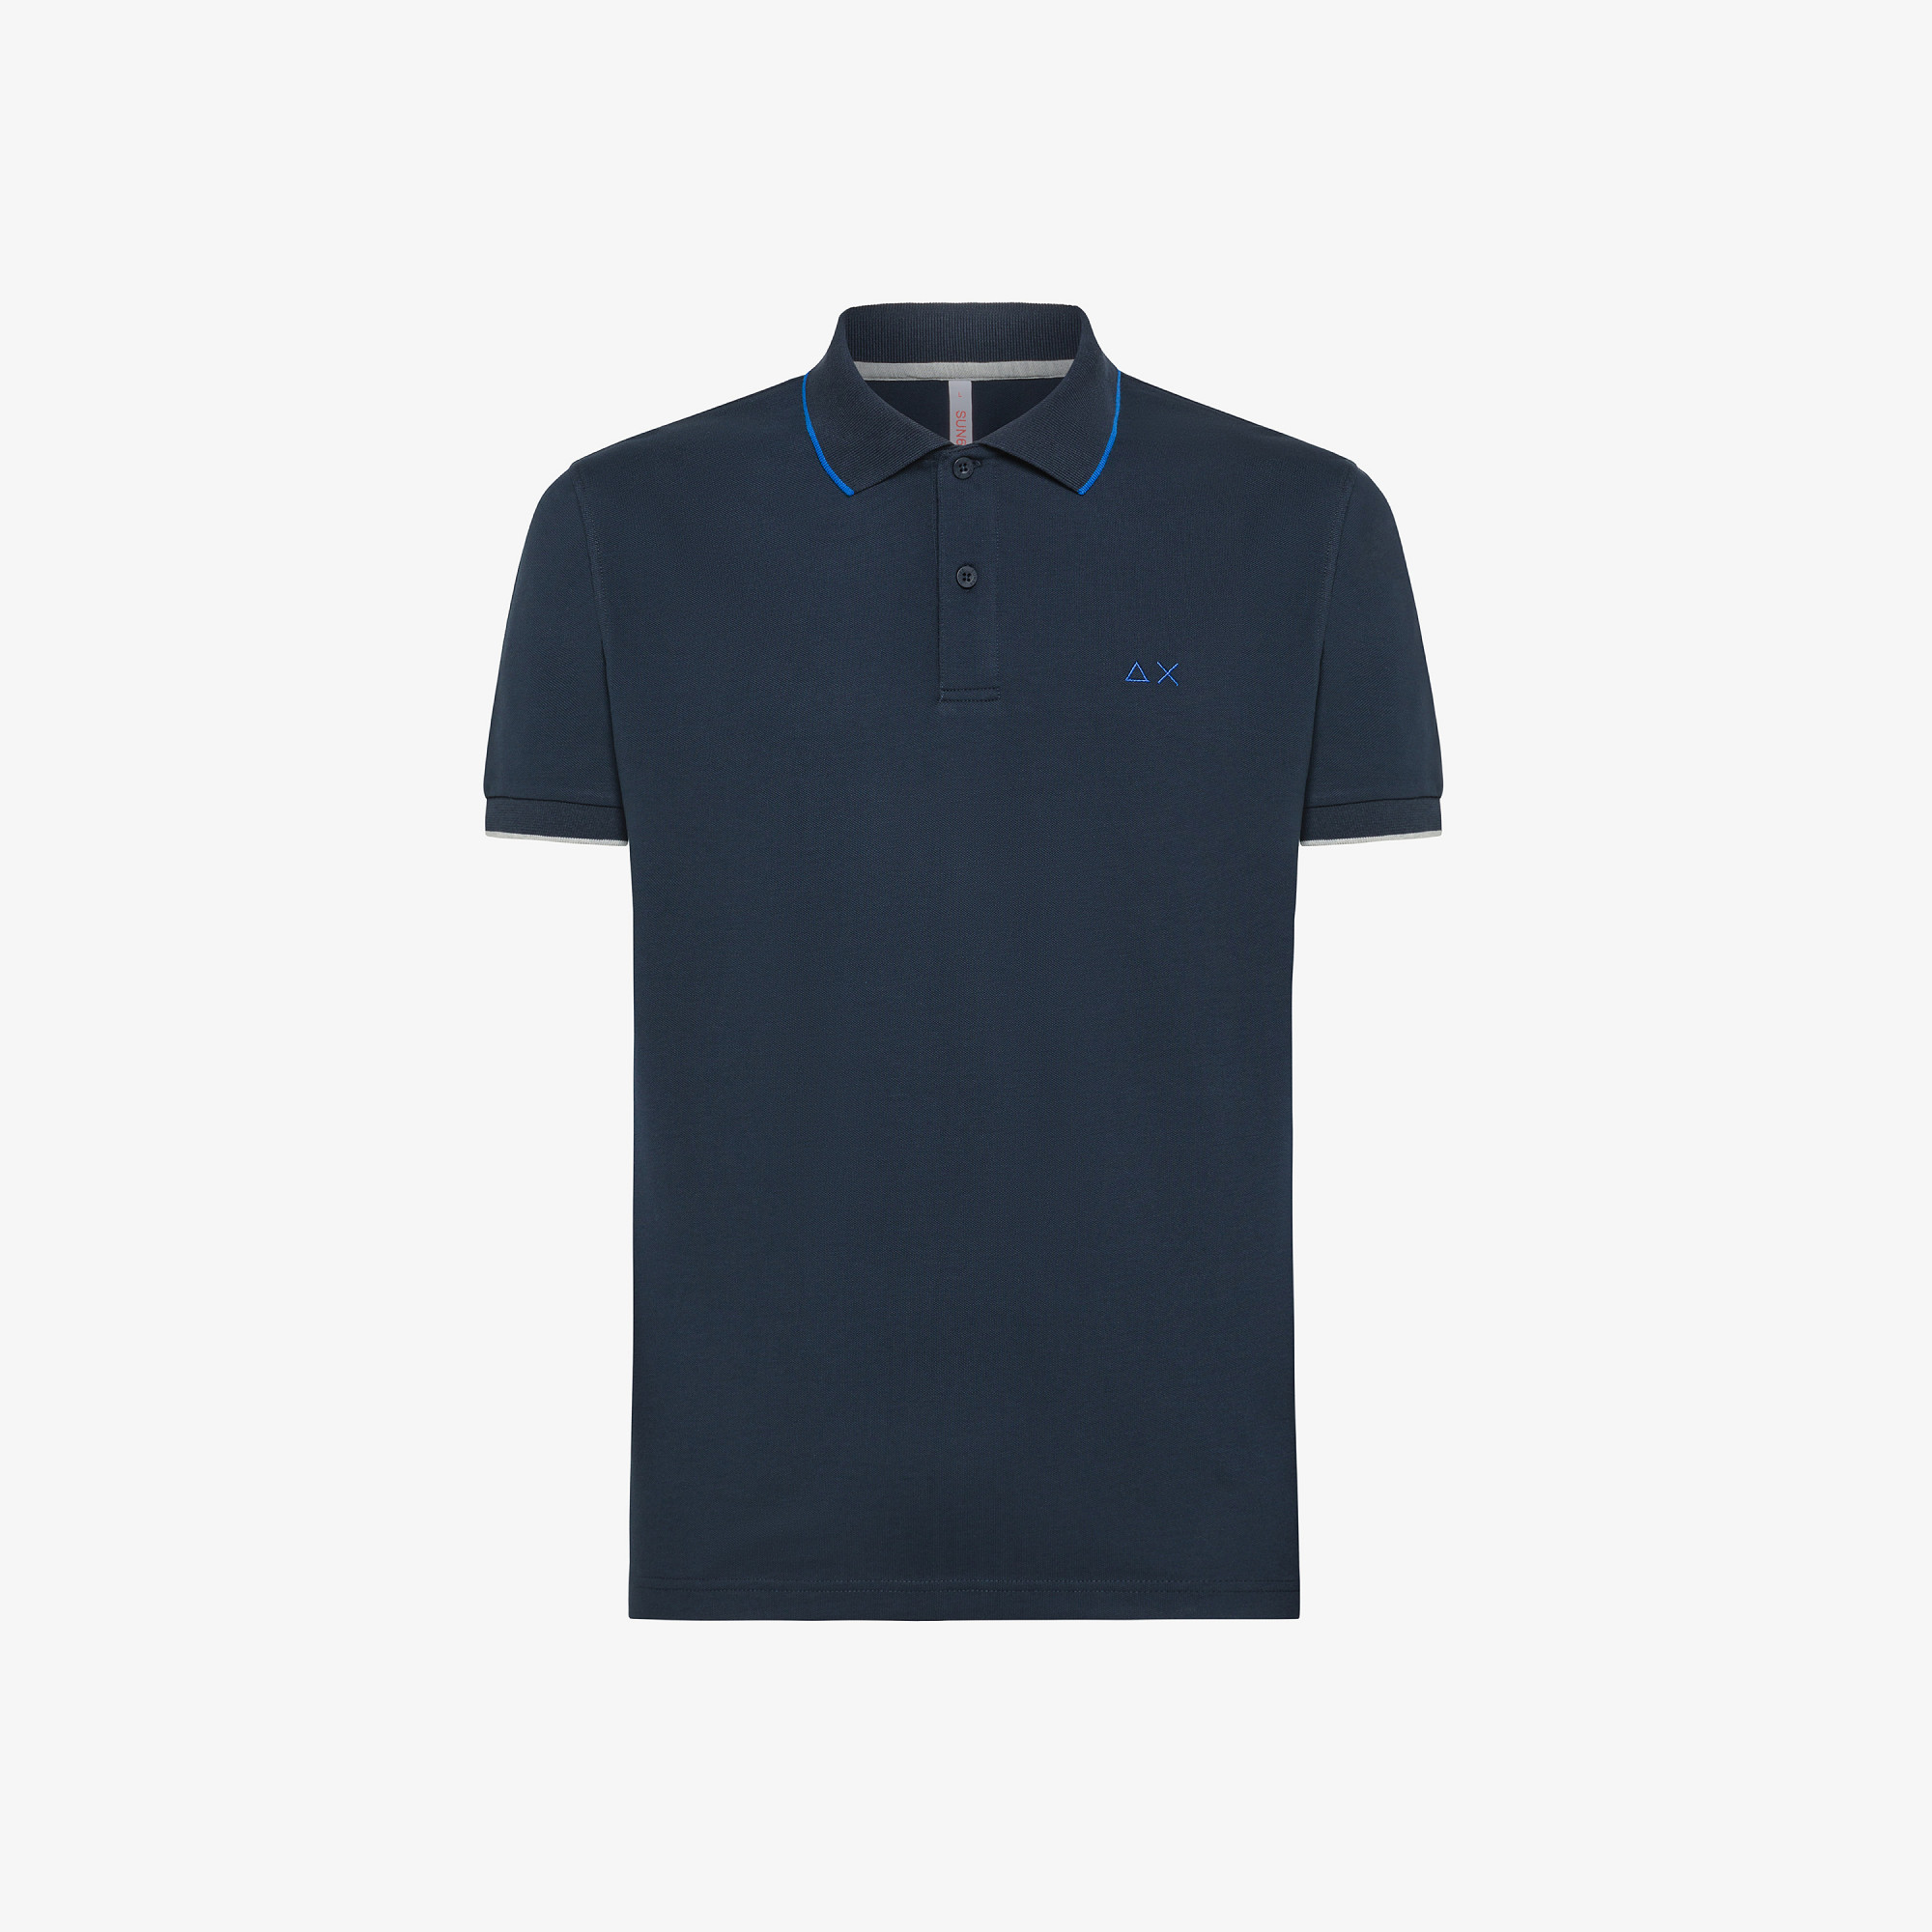 POLO SMALL STRIPES ON COLLAR S/S NAVY BLUE